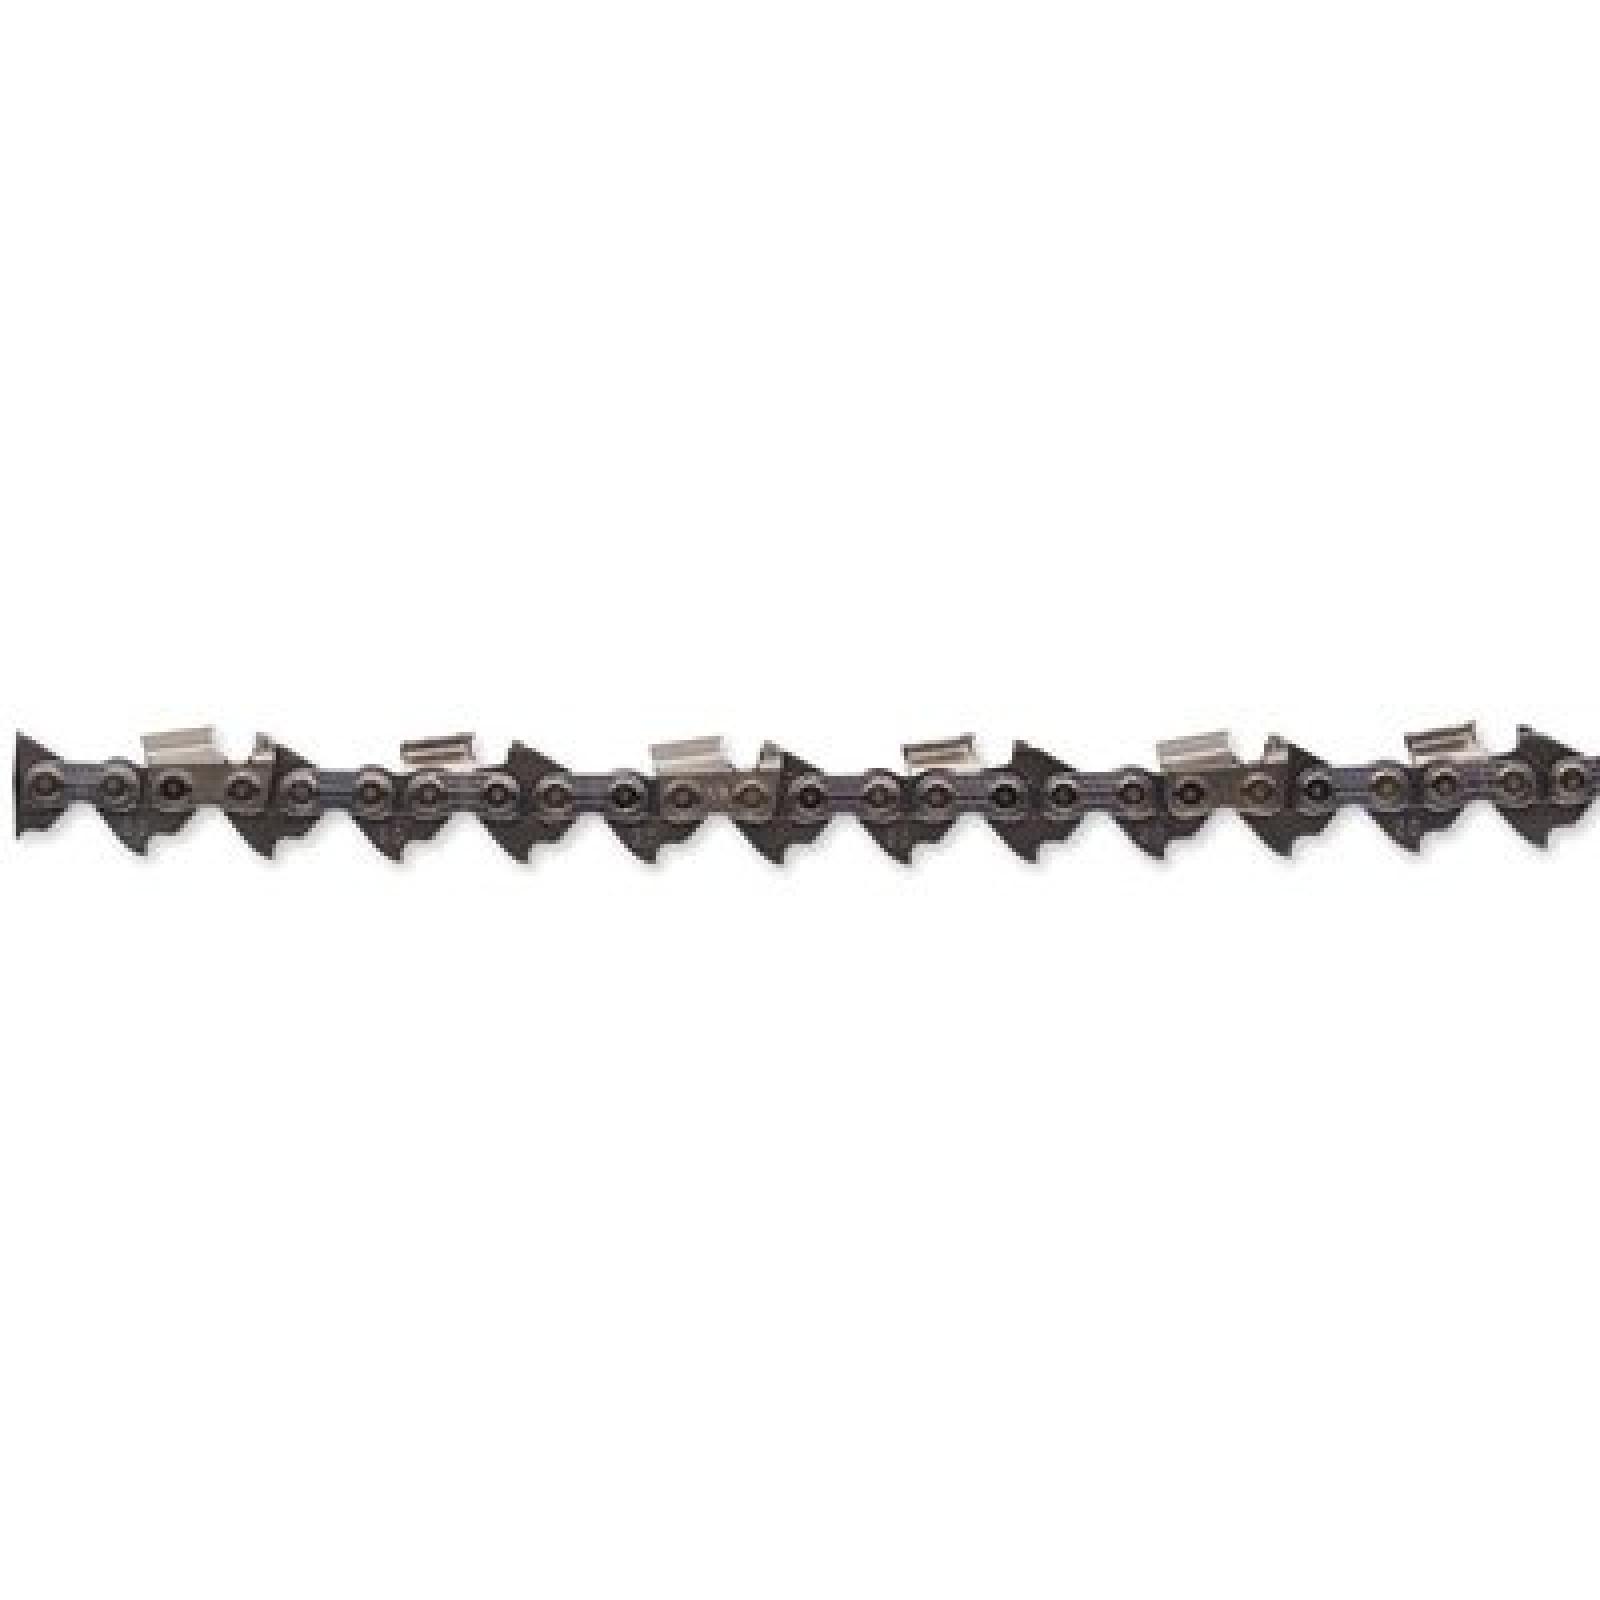 NEW Oregon 20LPX072G Chainsaw Chain 18" .325 .050 72 Drive Link